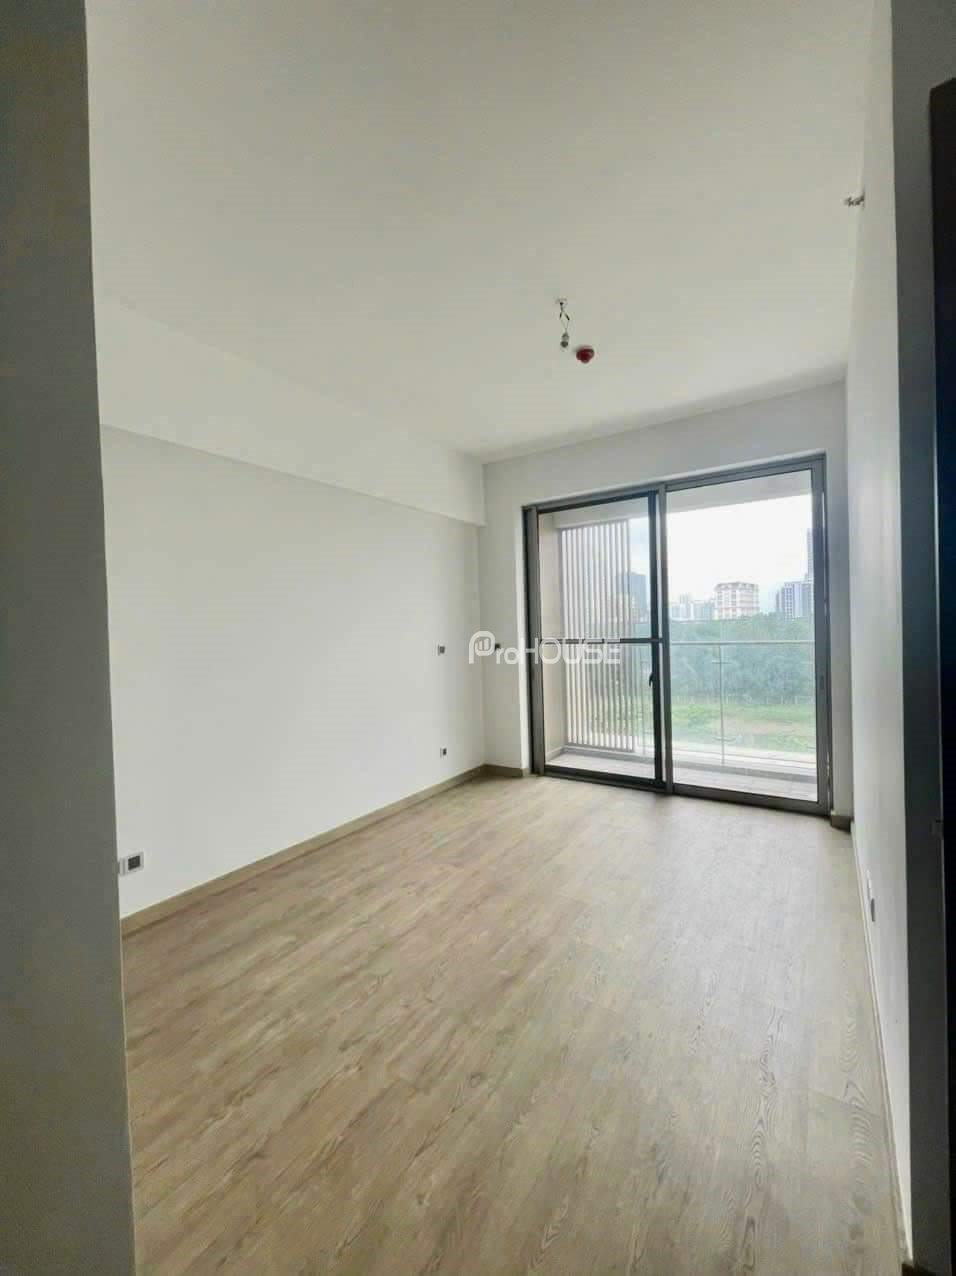 Cheap 3-bedroom apartment with river view for sale in Mitown District 7 with new furniture